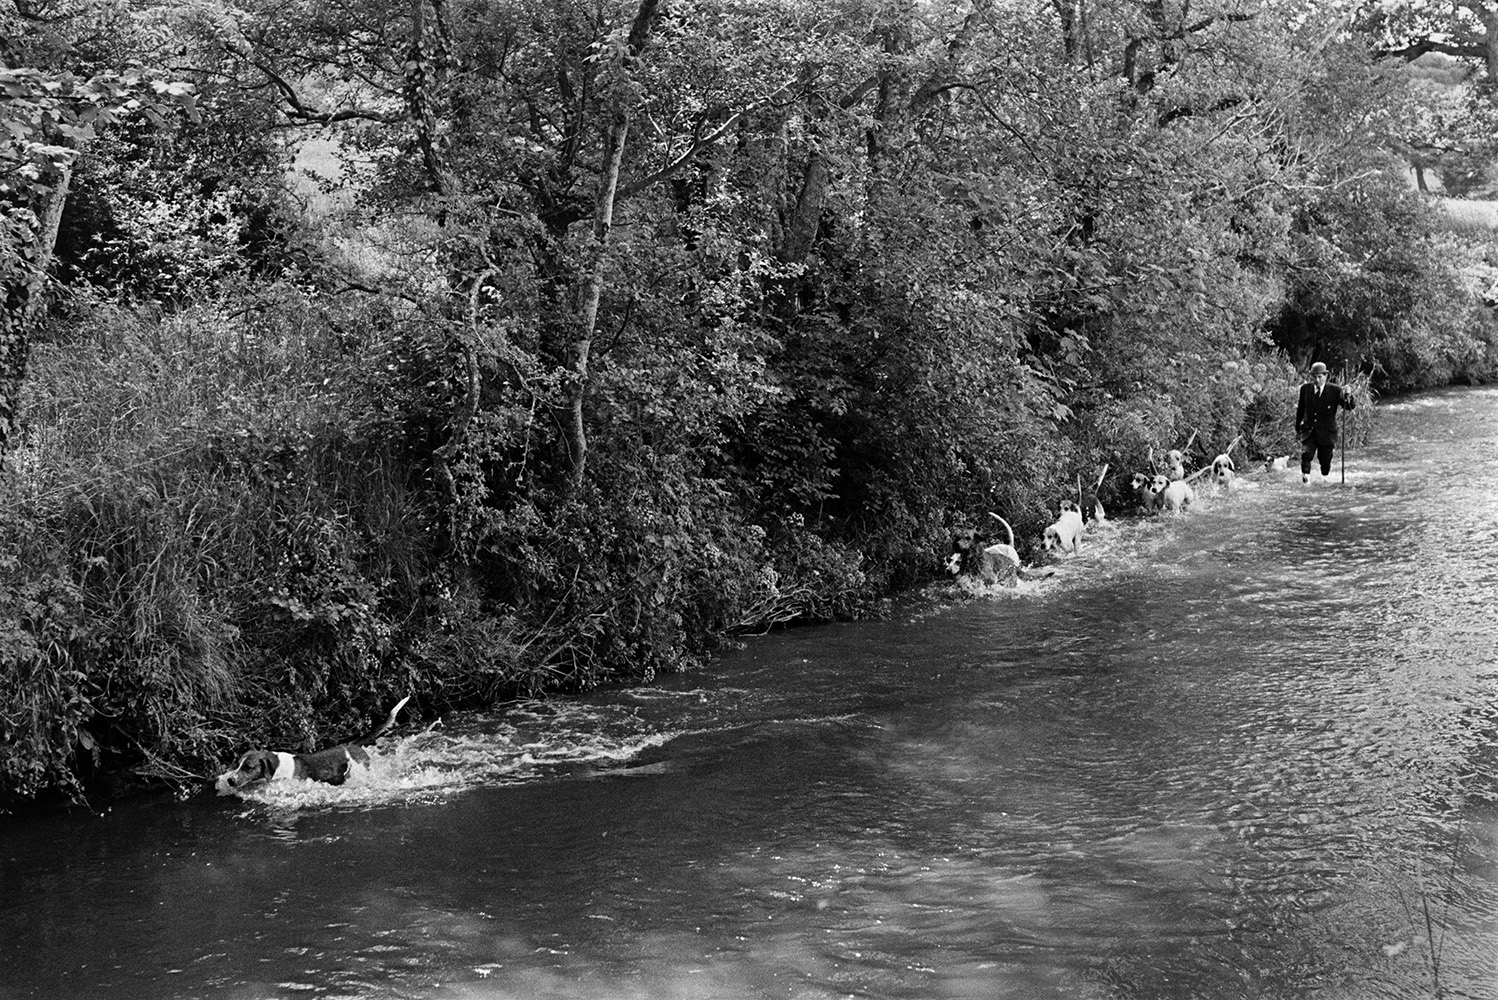 Dartmoor Otterhounds Hunt. Hounds searching for otters along a hedgerow in a river at Lifton, near Launceston. The river could be the River Thrushel or the River Lyd. A man is following them, wading through the river.